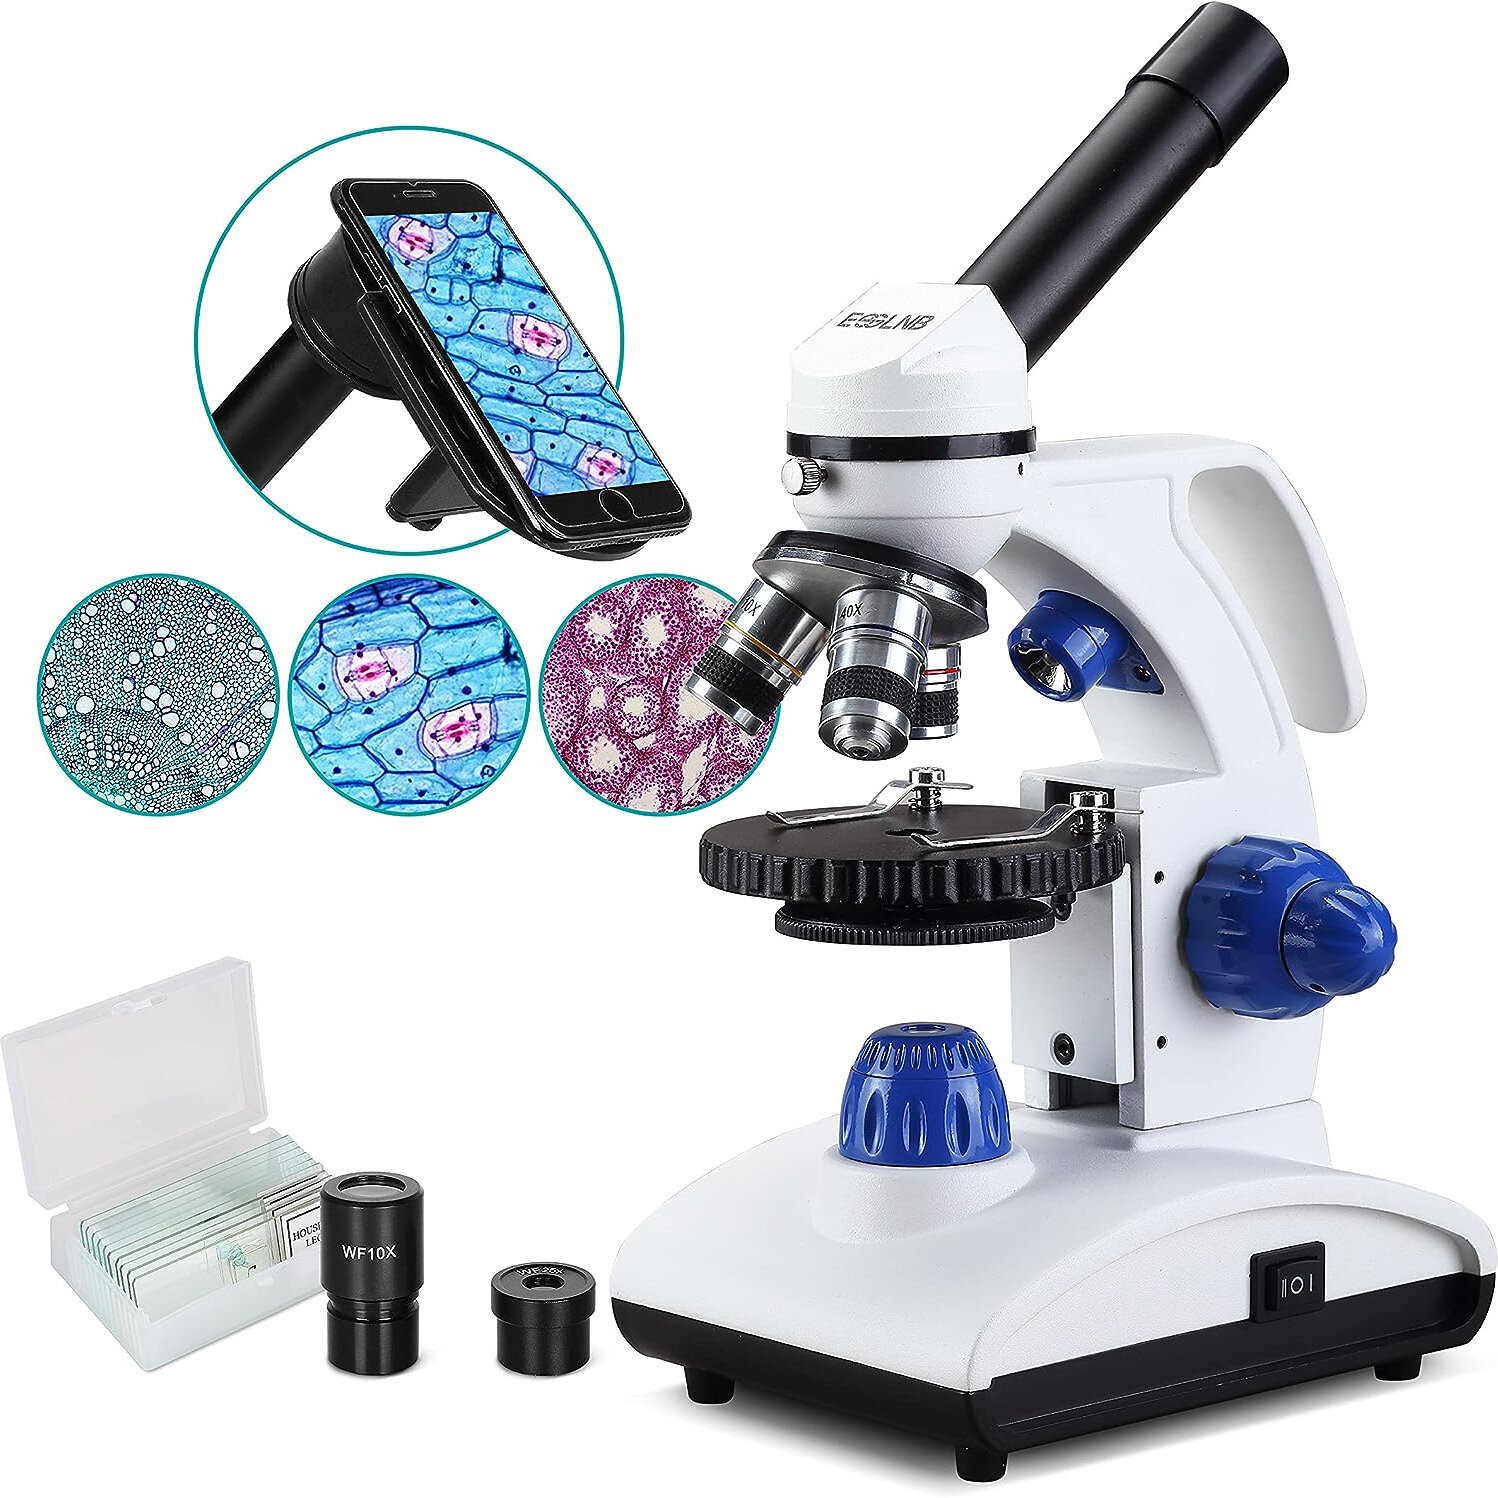 [EU Direct] ESSLNB ES1045 Microscope 1000X Student Microscope for Kids LED Biological Light Microscope with Slides and Phone Adapter All-Metal Optical Glass Lenses